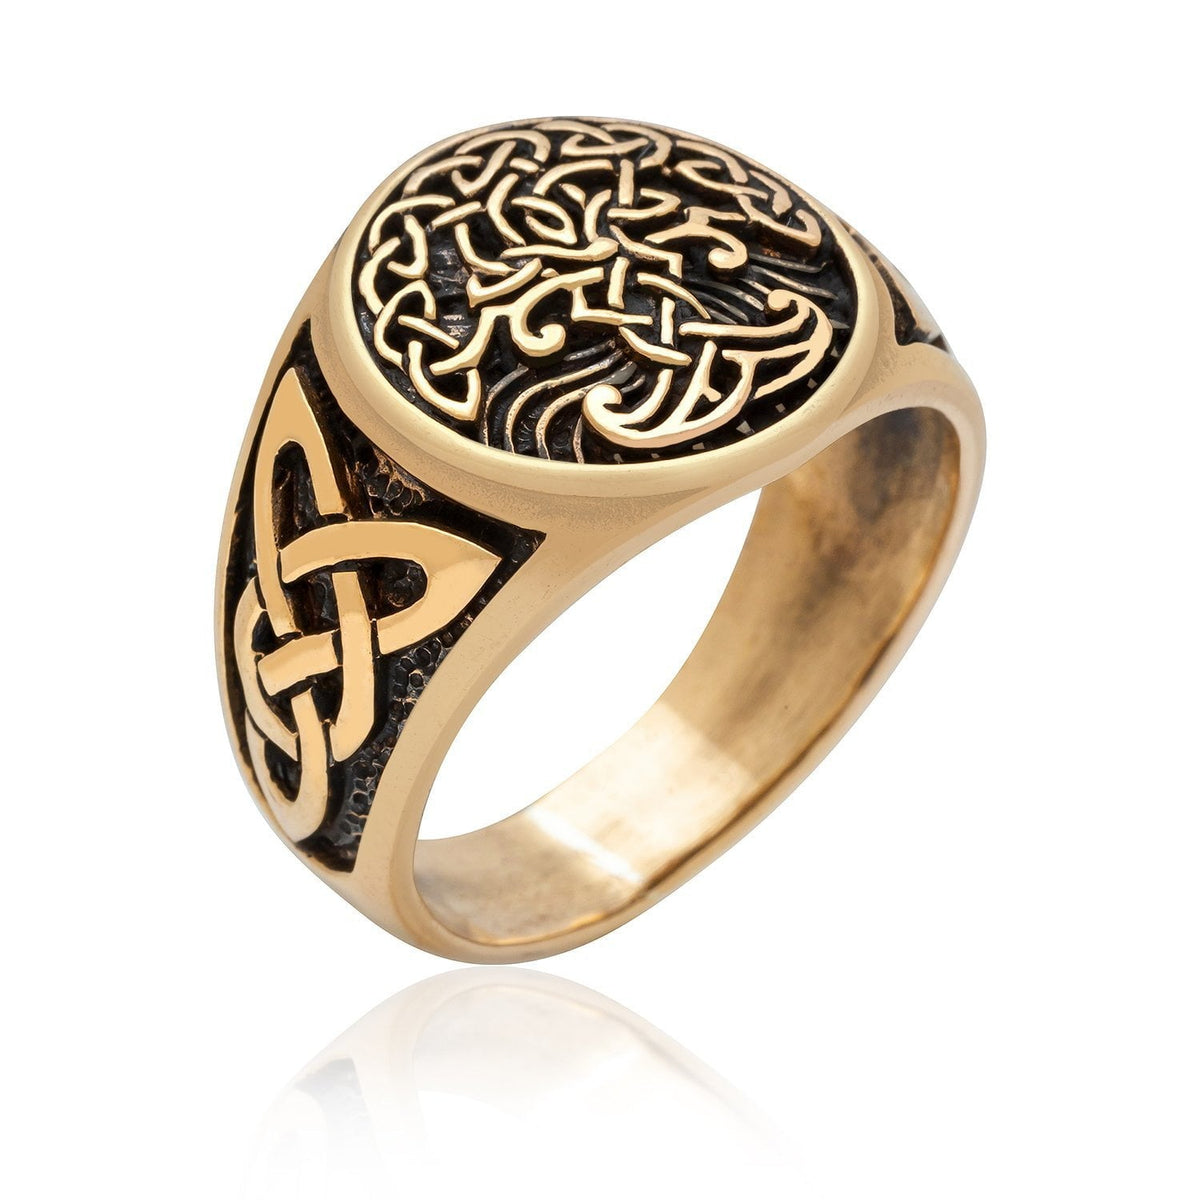 Viking Yggdrasil Bronze Ring with Knotwork - SilverMania925